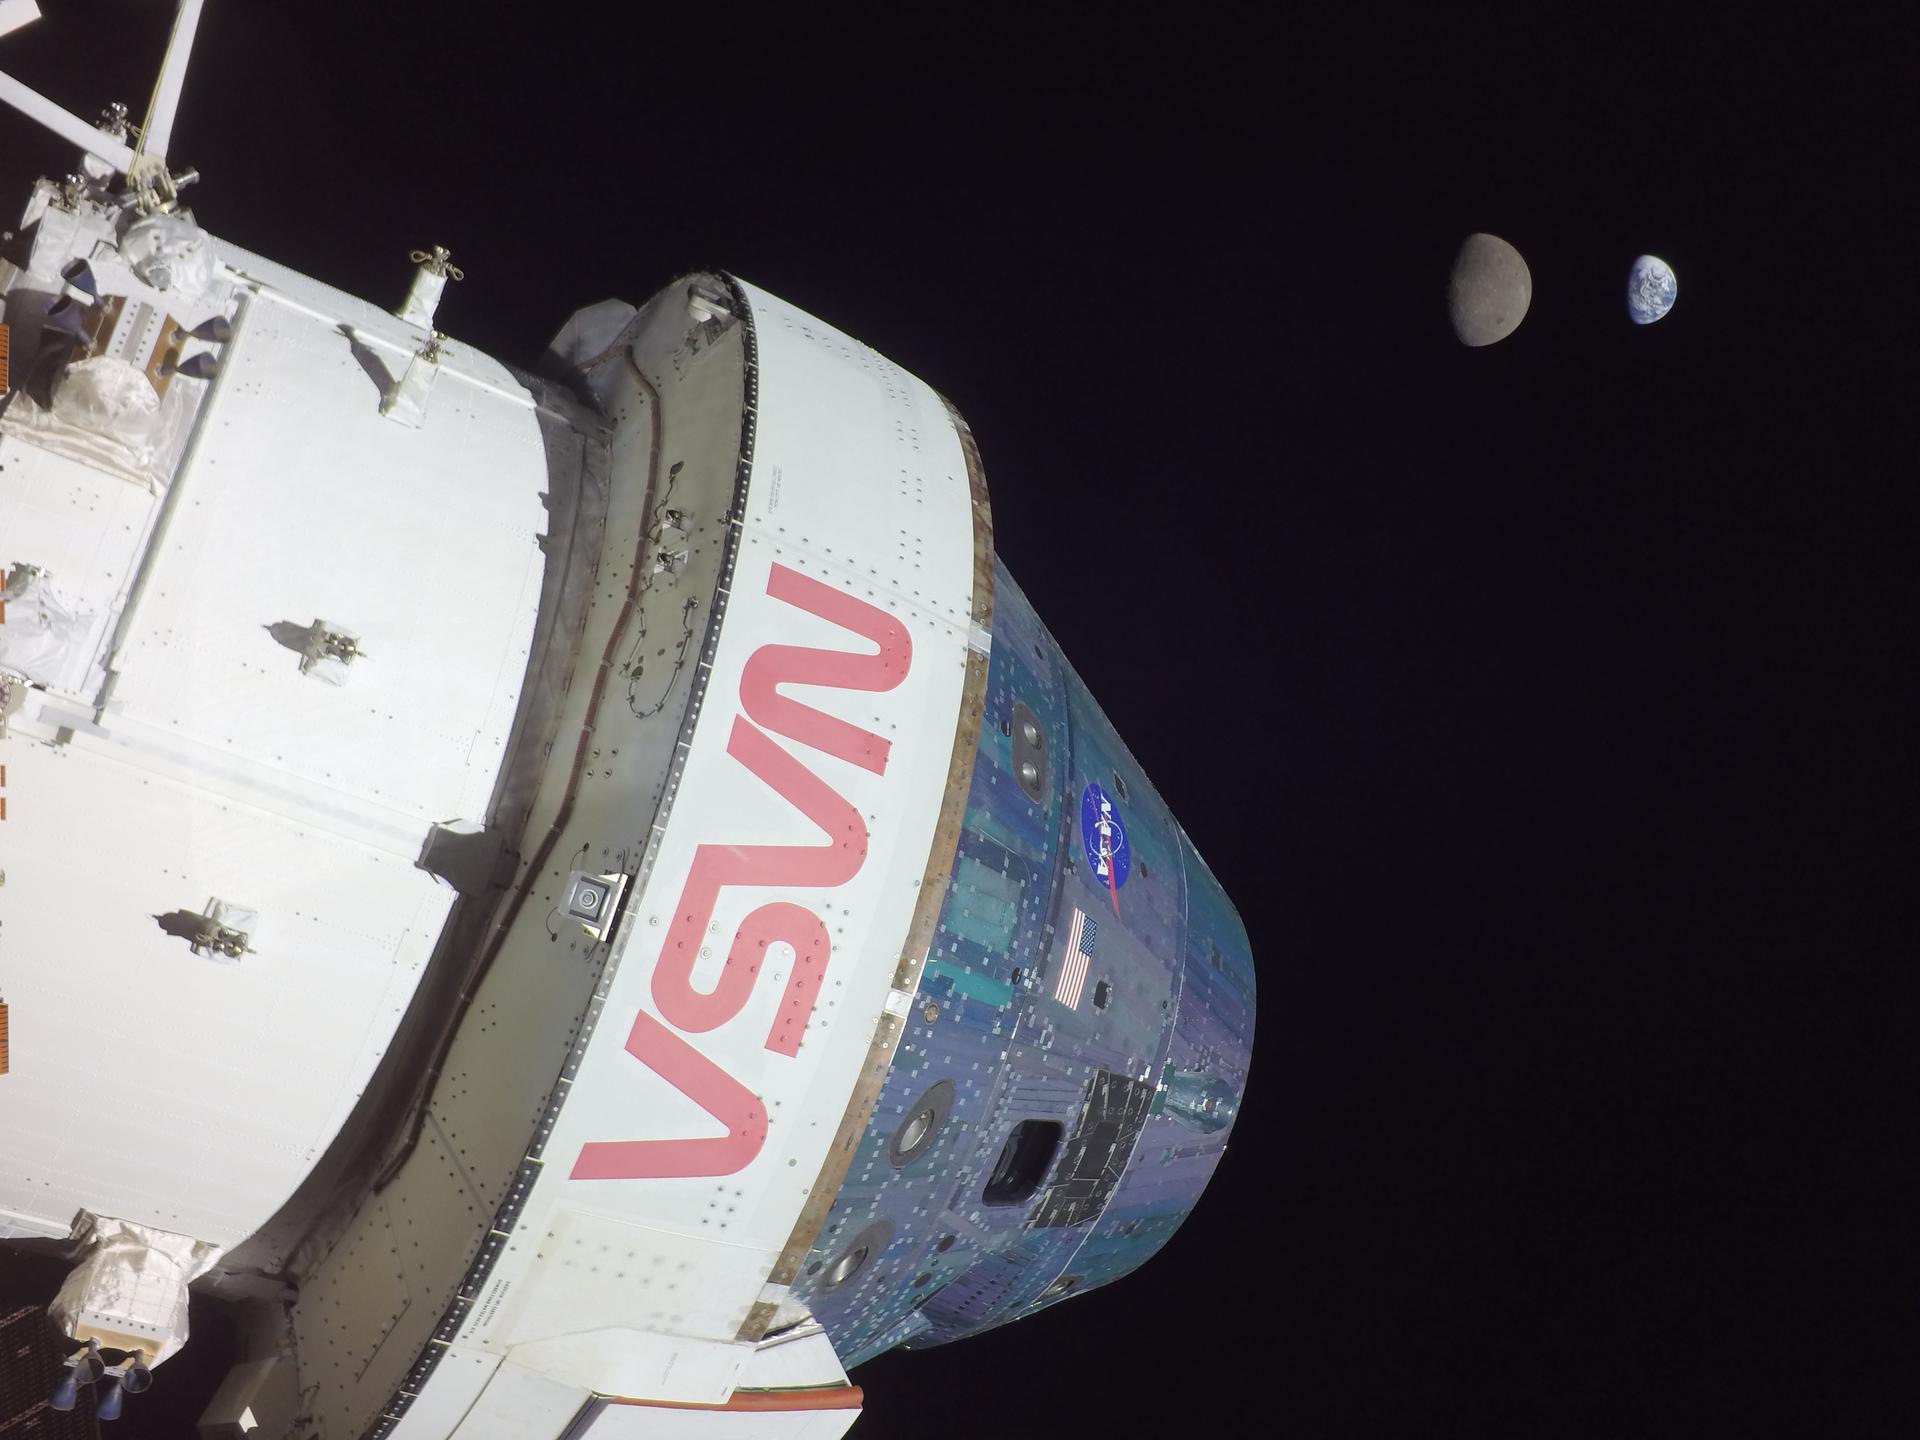 The Earth and moon as seen from the Orion spacecraft.